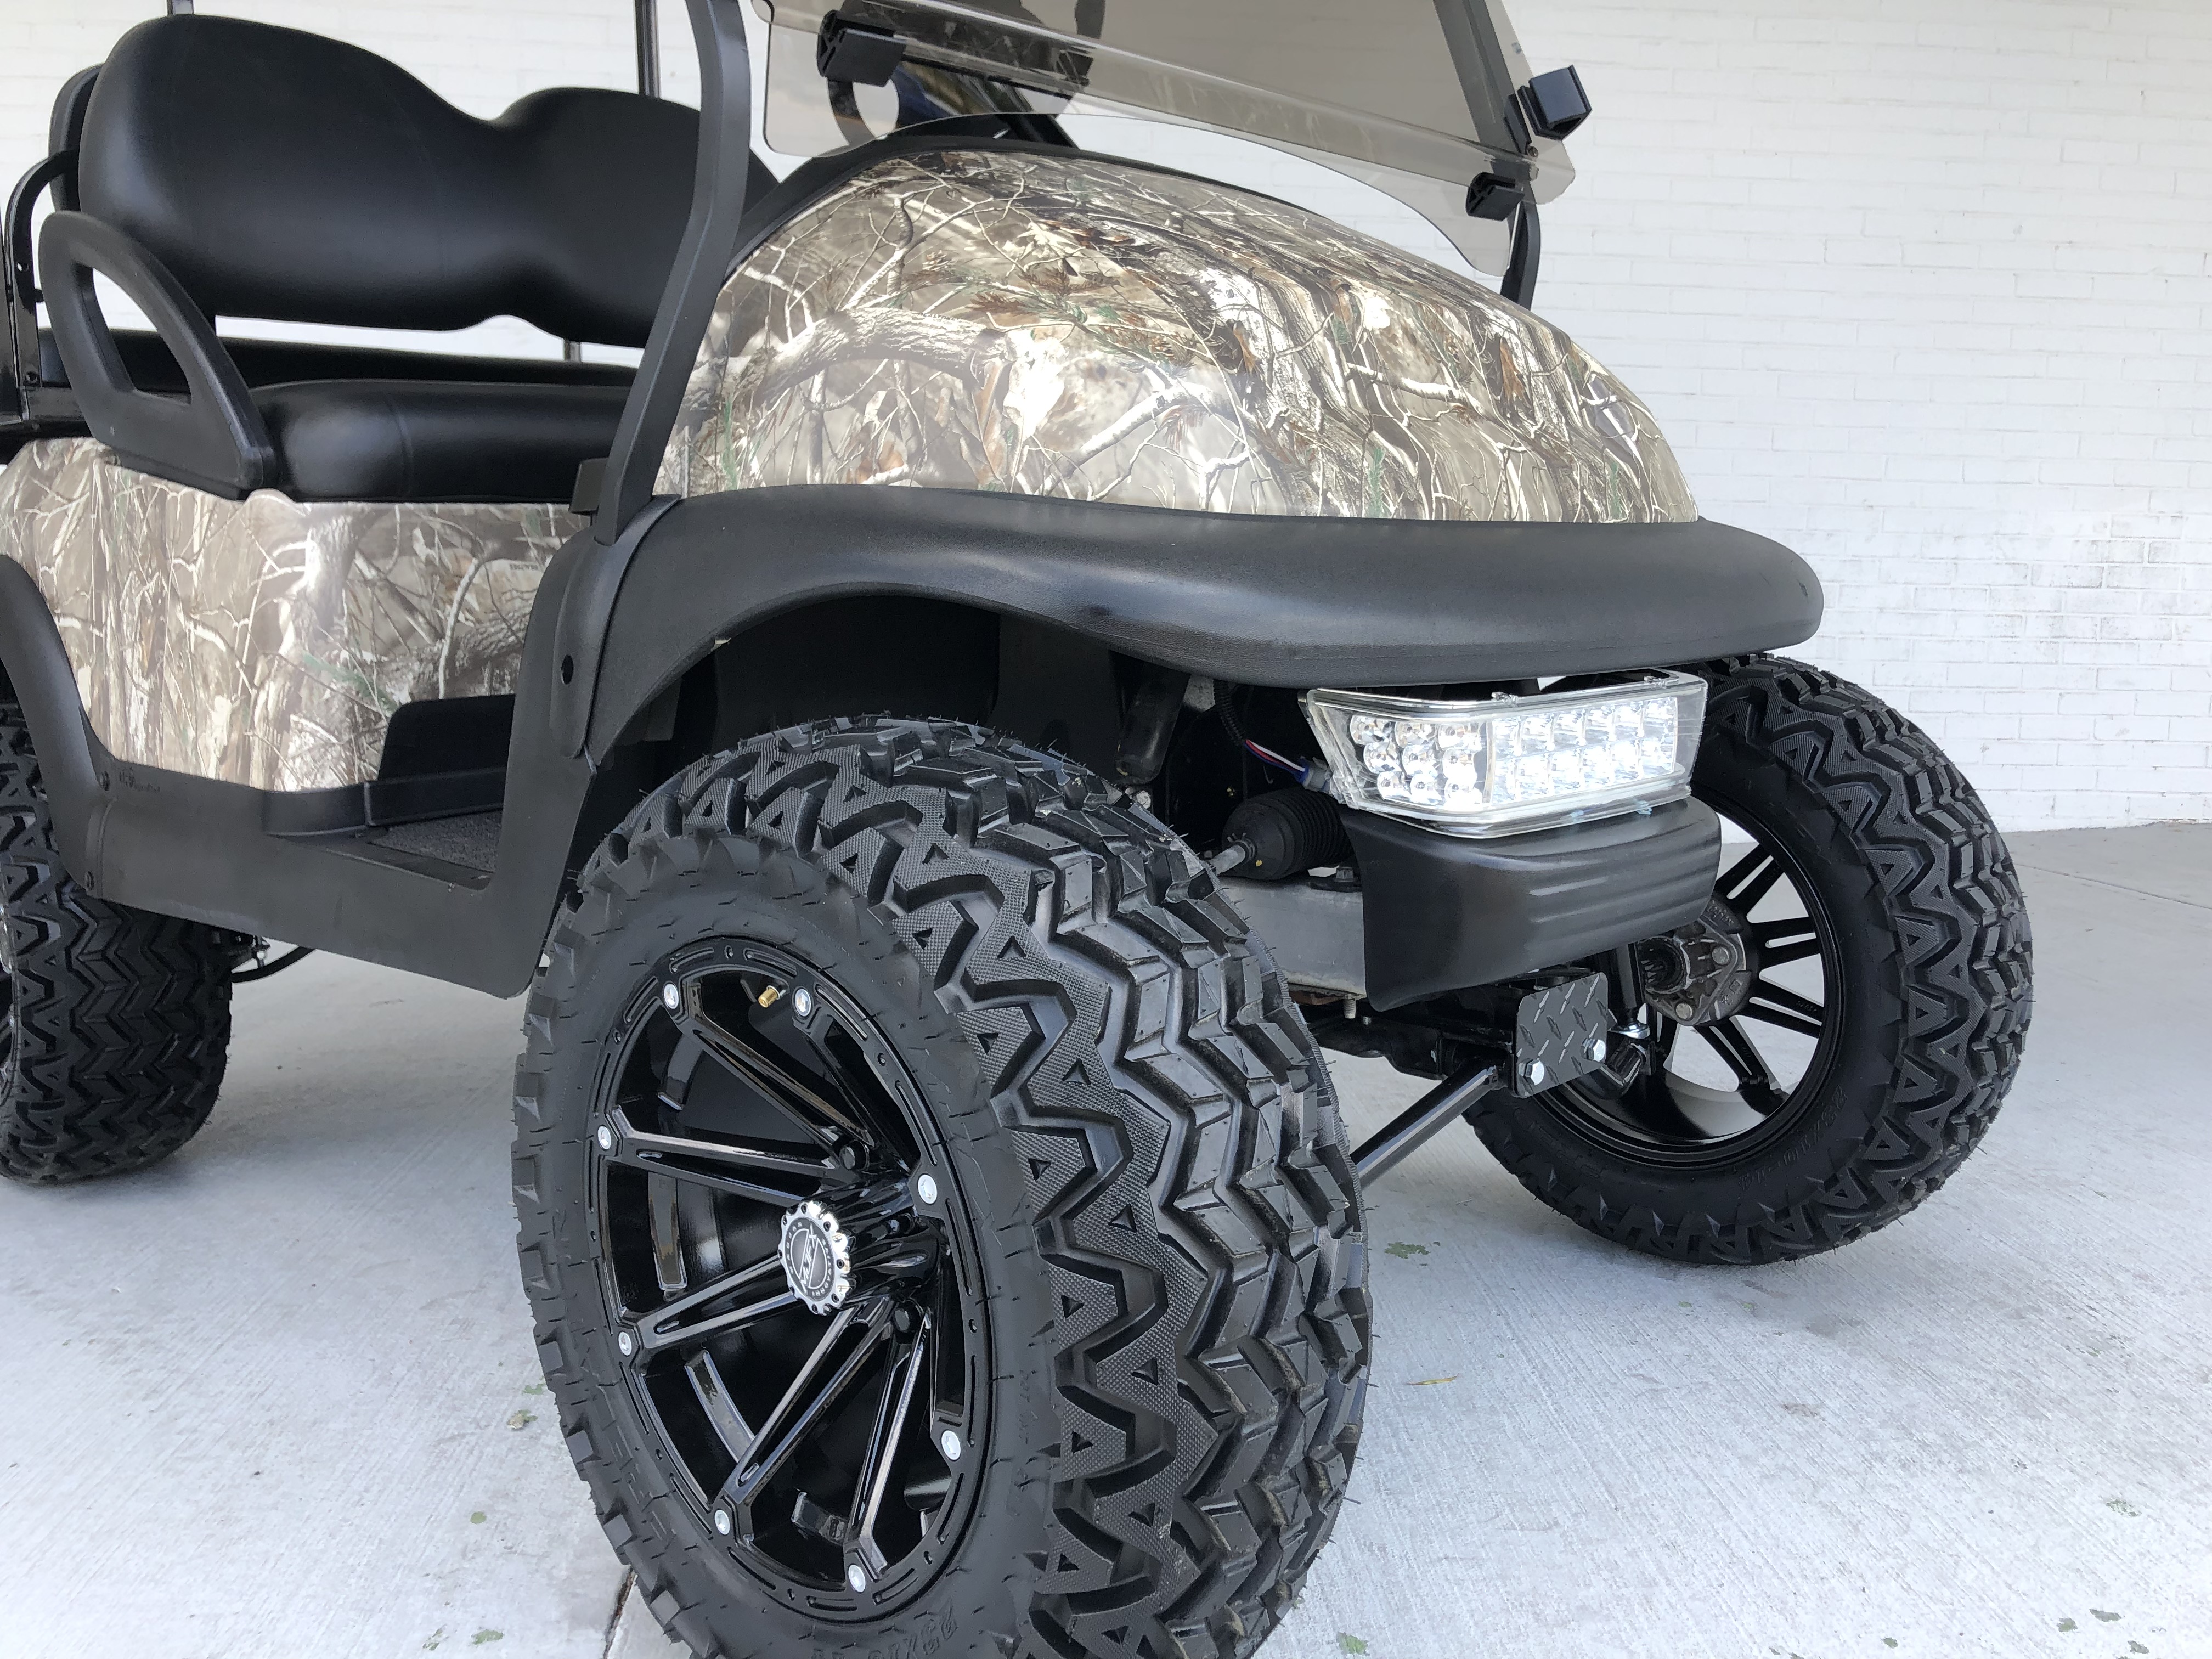 HUNTING OFFROAD GOLF CART CAMO BODY LIFTED